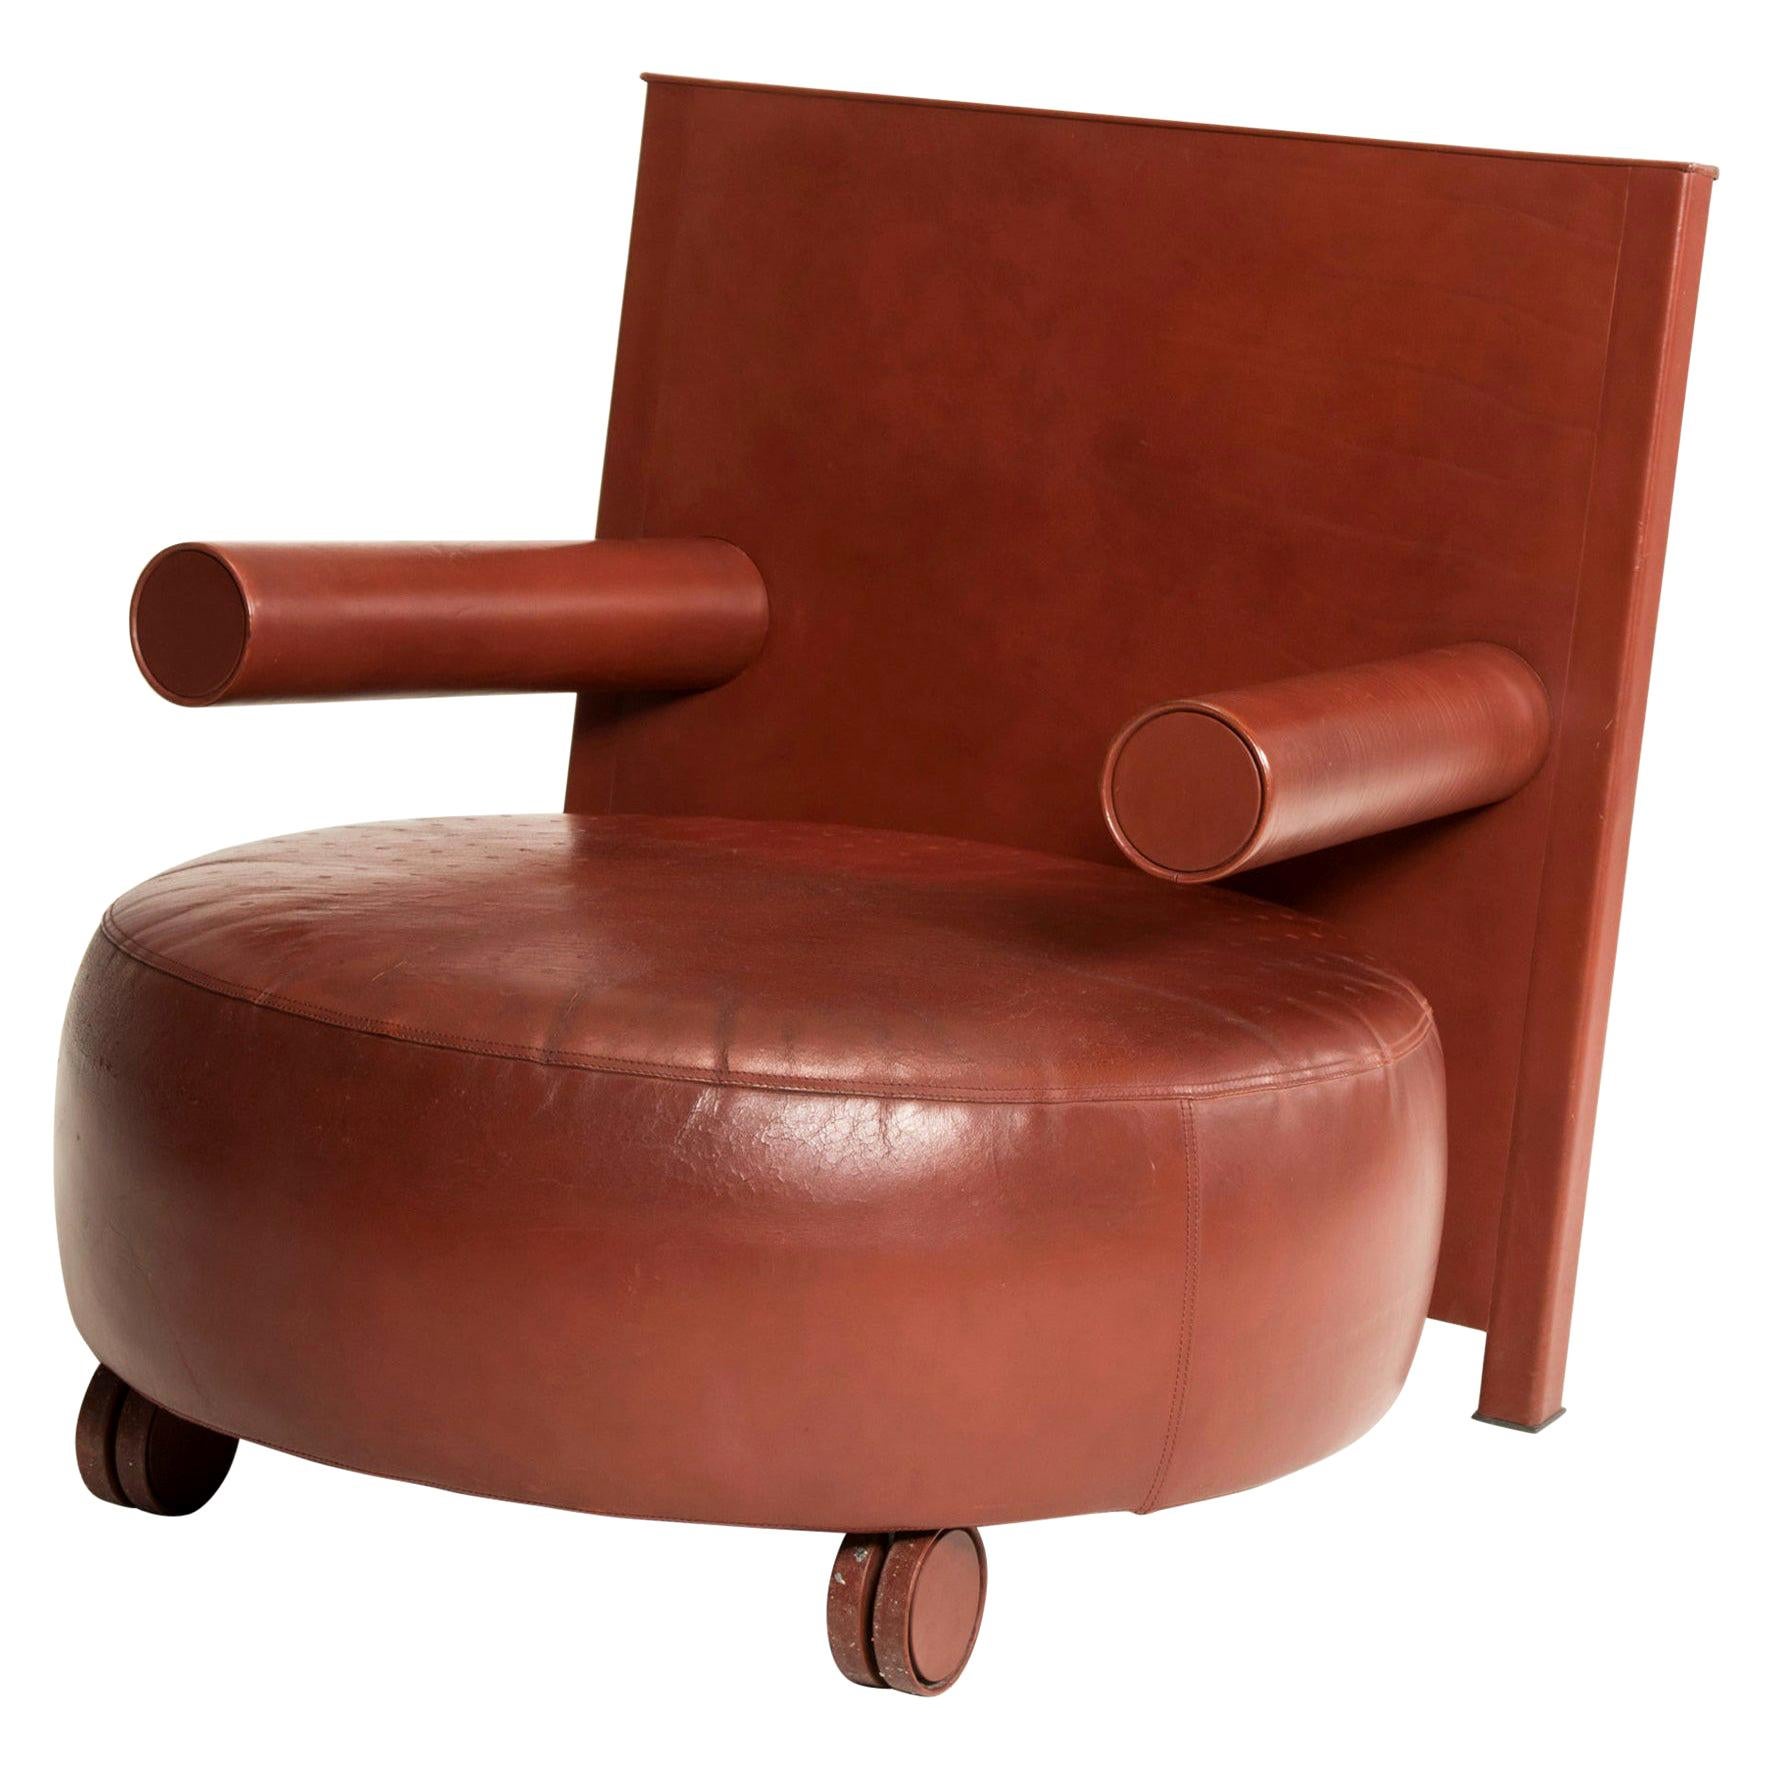 1980s Antonio Citterio for B&B Italia Brown Leather Rounded Armchair